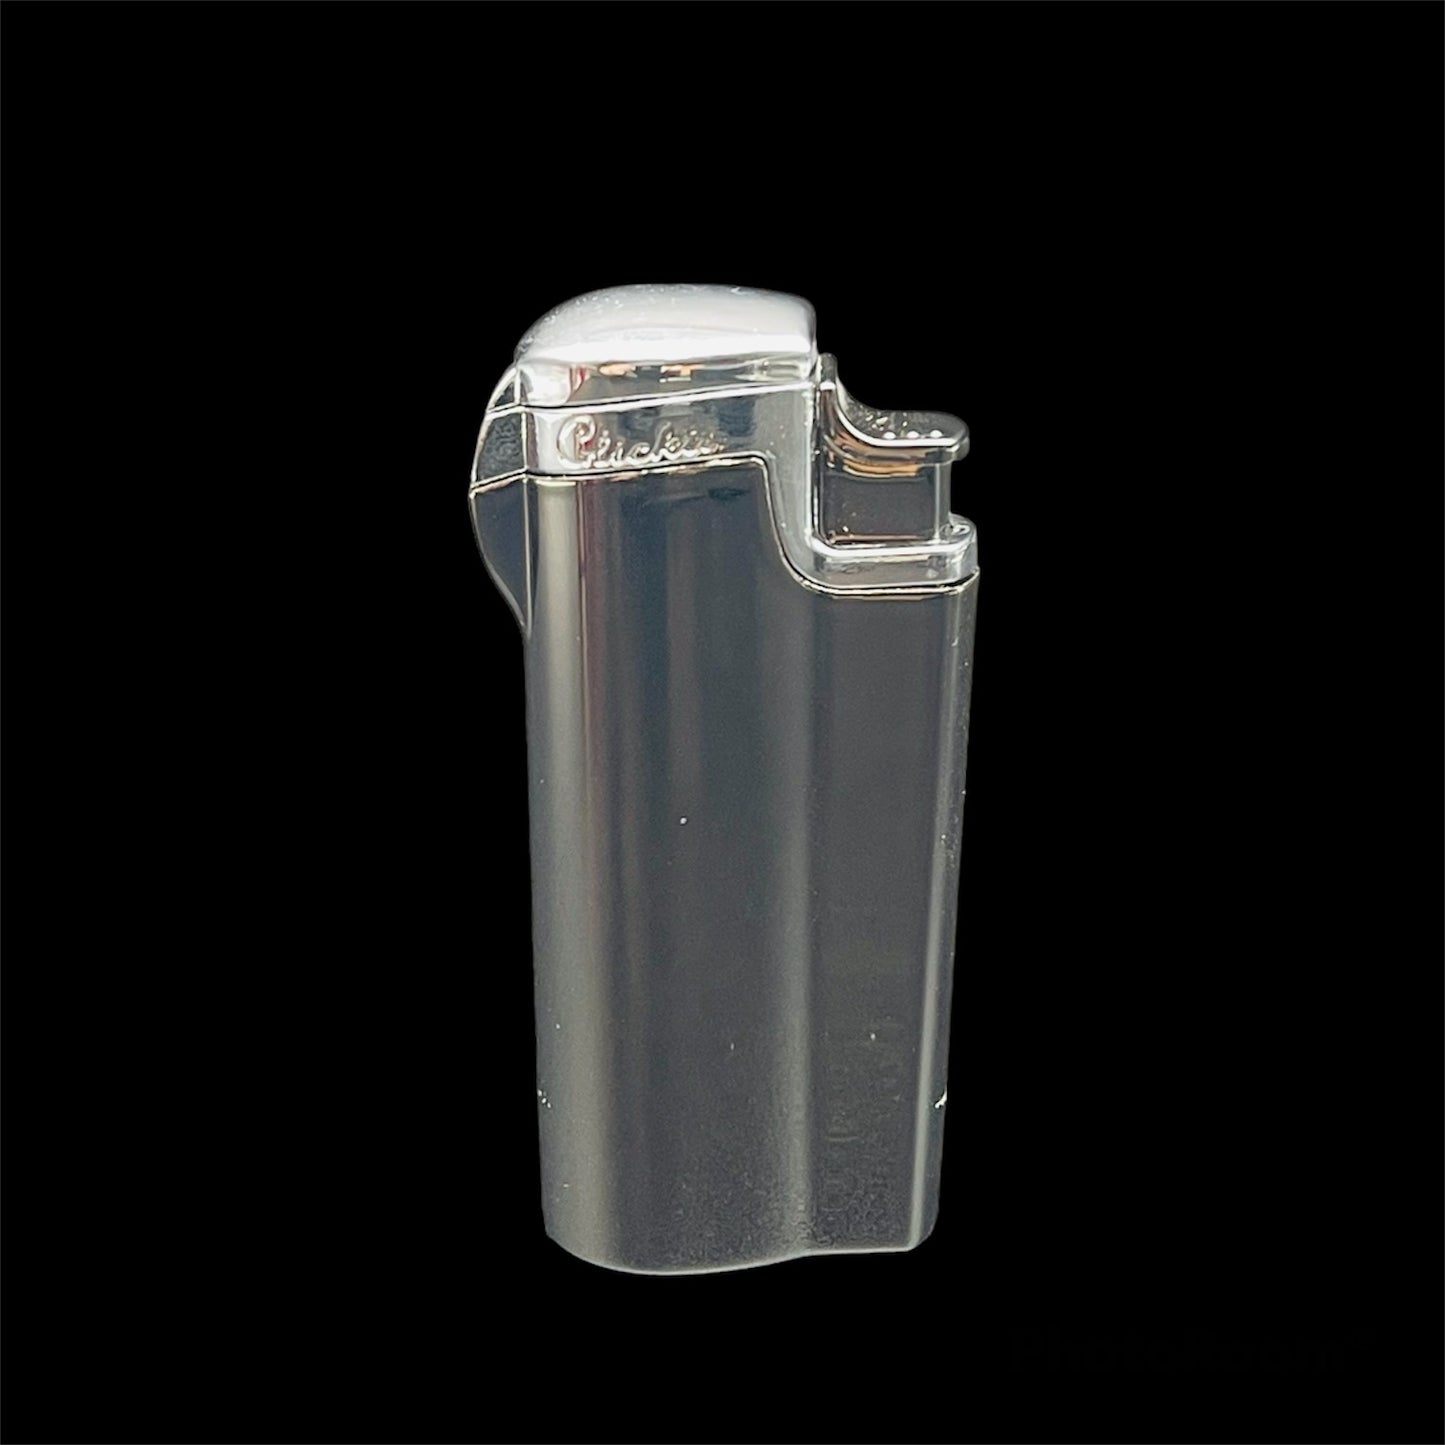 Four Flames Pocket Size Torch Lighter gray